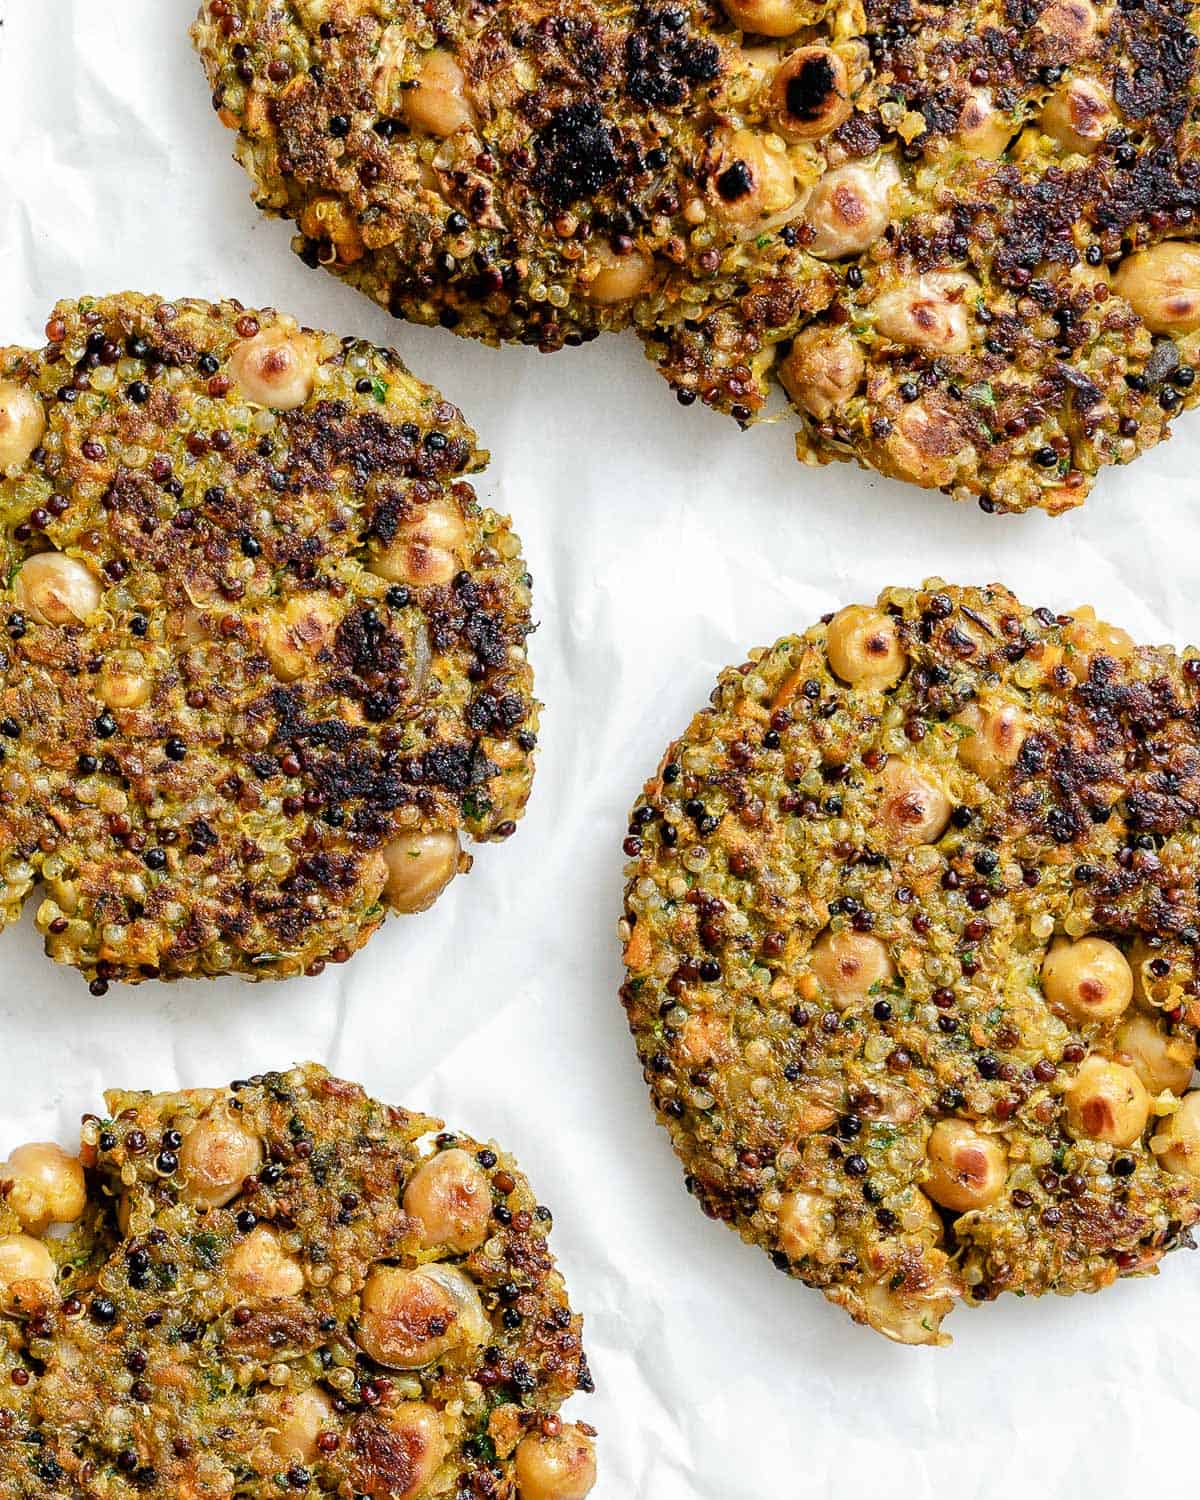 completed Quinoa Chickpea Patties on a white surface